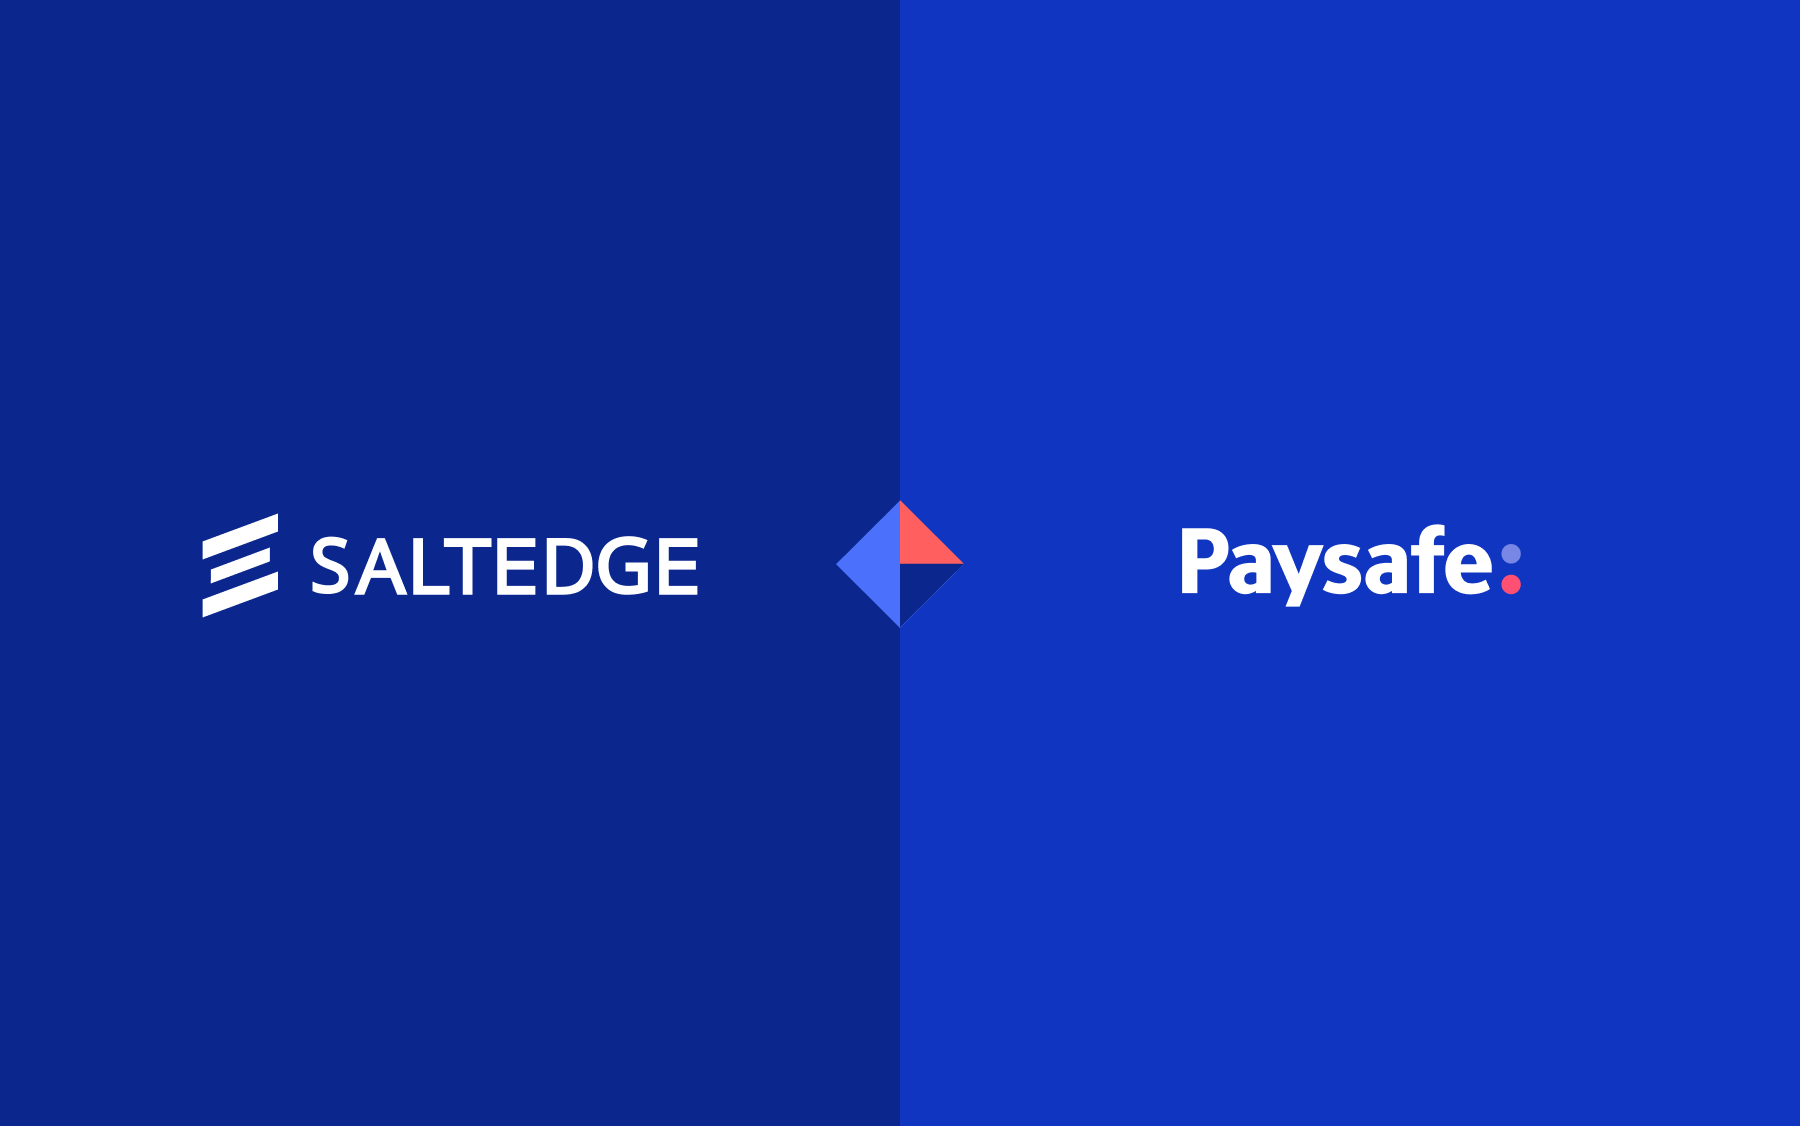 Salt Edge to Streamline KYC and Onboarding for Paysafe and its Customers